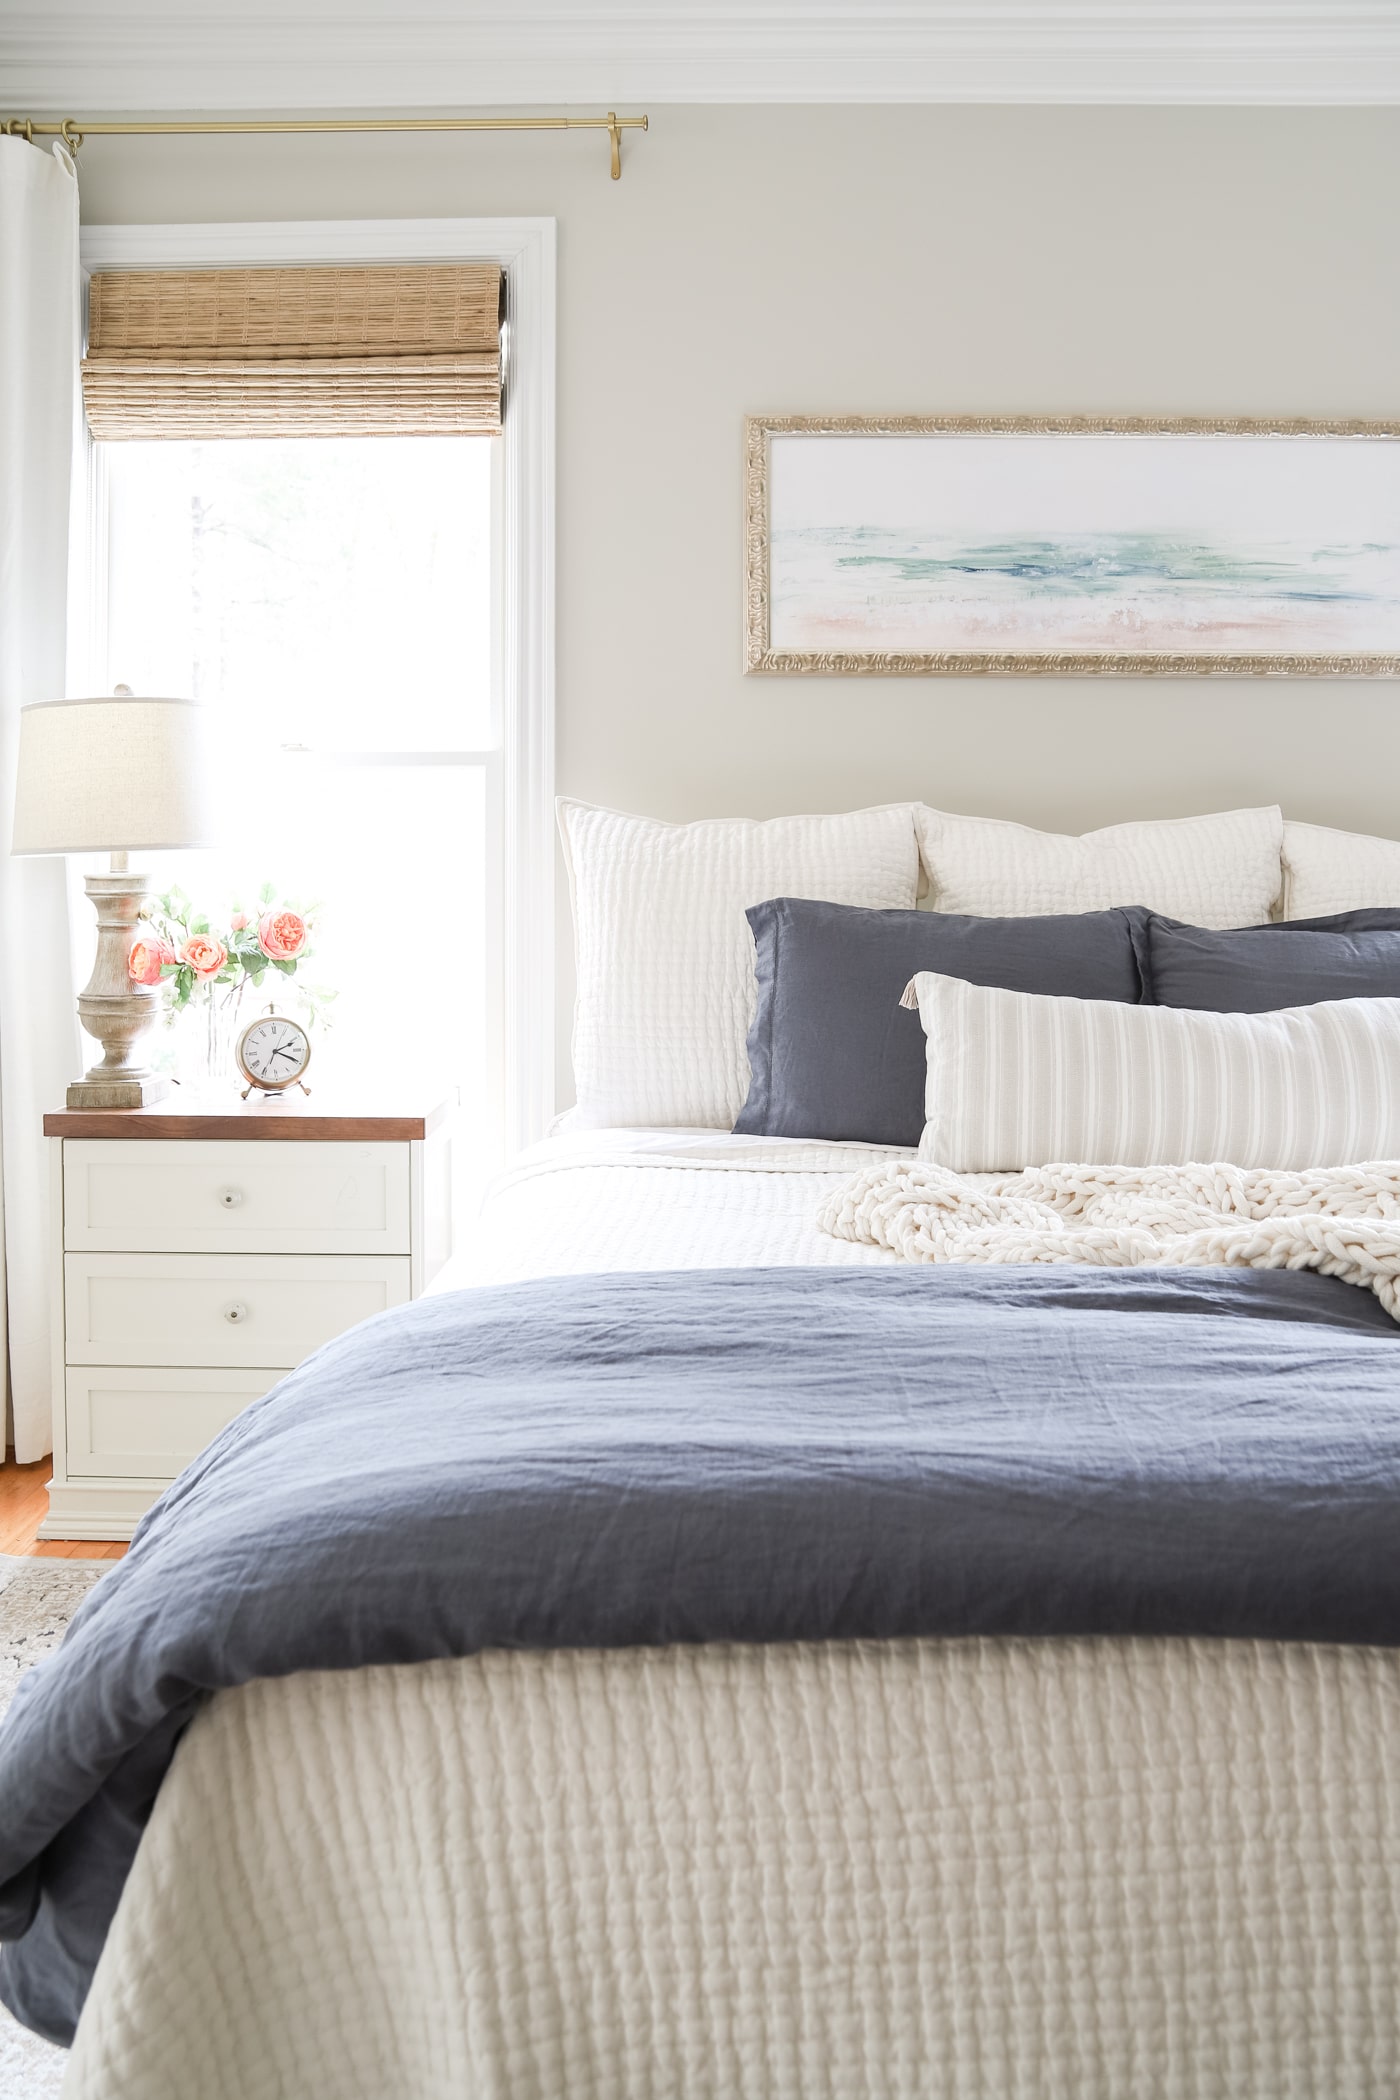 Decorating 101: How to Make a Bed (Like a Pro)